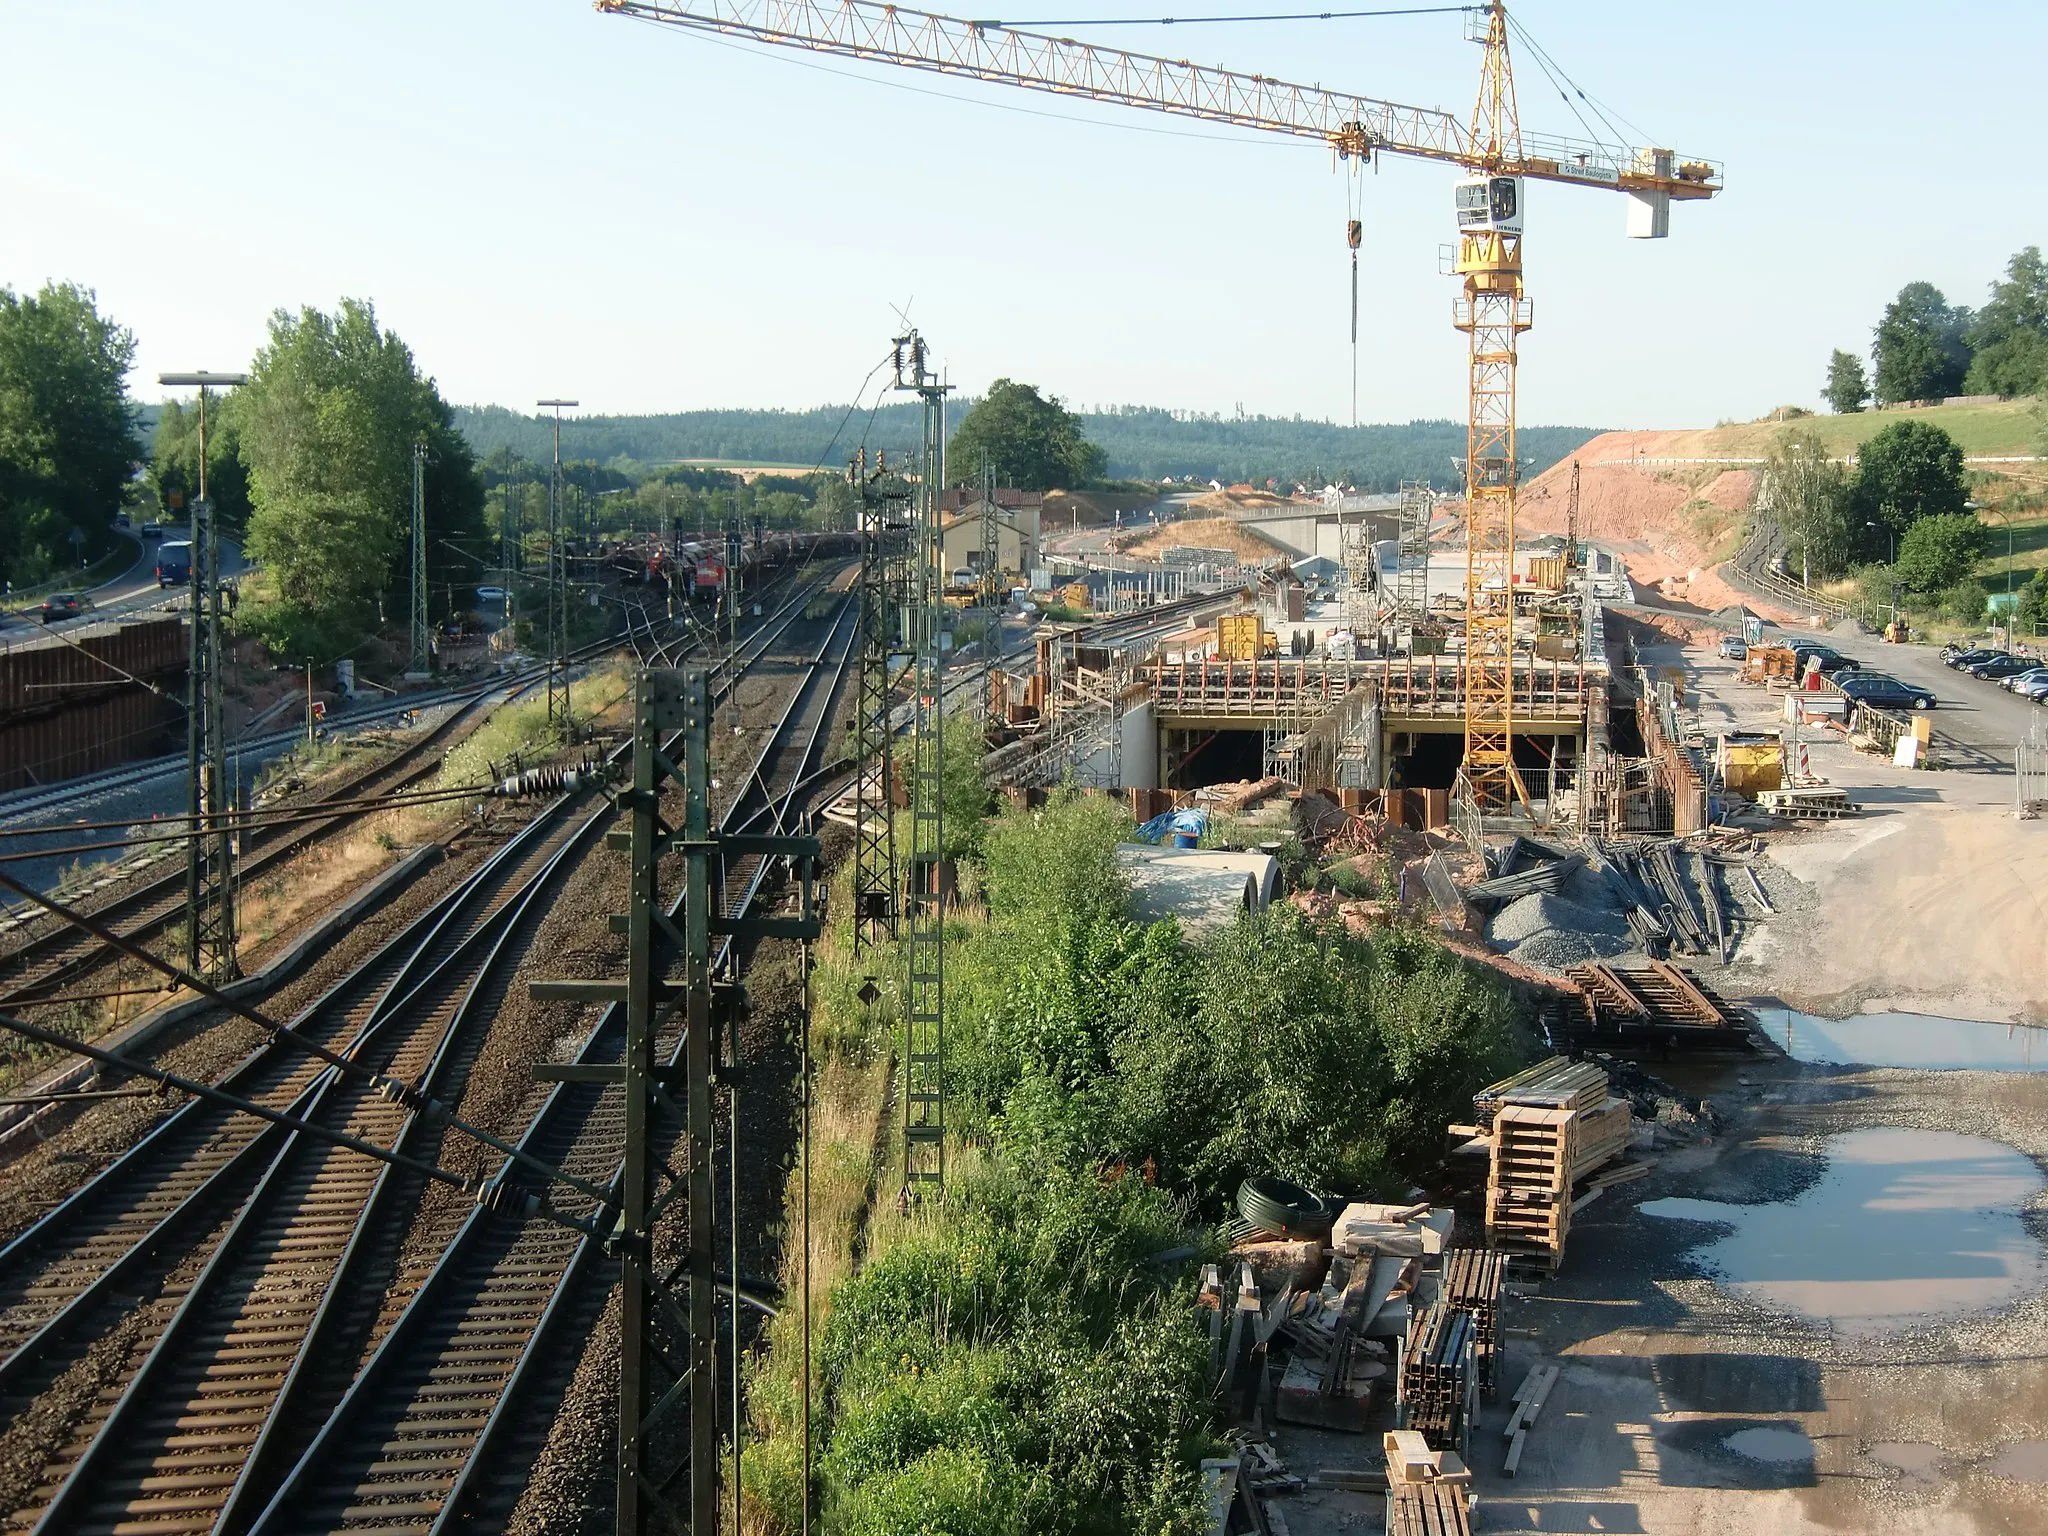 Photo showing: Construction site at train station w:Neuhof, Hesse. On the very left is Bundesstraße 40 which will be substituted by w:Bundesautobahn 66 (tunnel under construction on the right).
When completed the new railway track will be situated between the original track and the Autobahn tunnel, right of the station building.